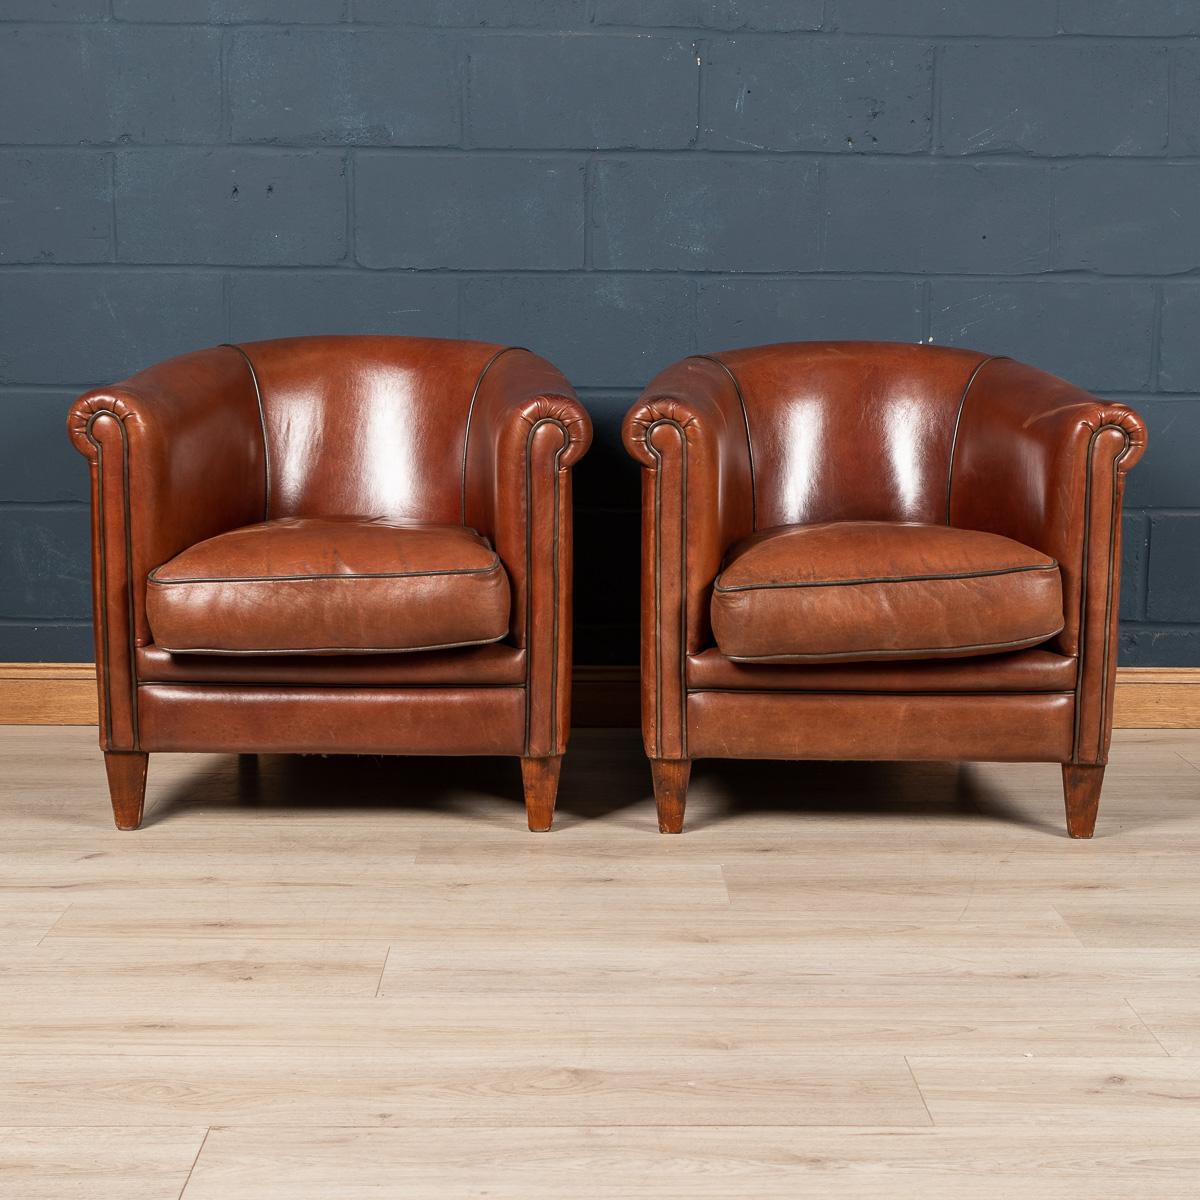 Showing superb patina and colour, this wonderful pair of tub chairs were hand upholstered sheepskin leather in Holland by the finest craftsmen. Fantastic look for any interior, both modern and traditional.

Please note that our interior pieces are